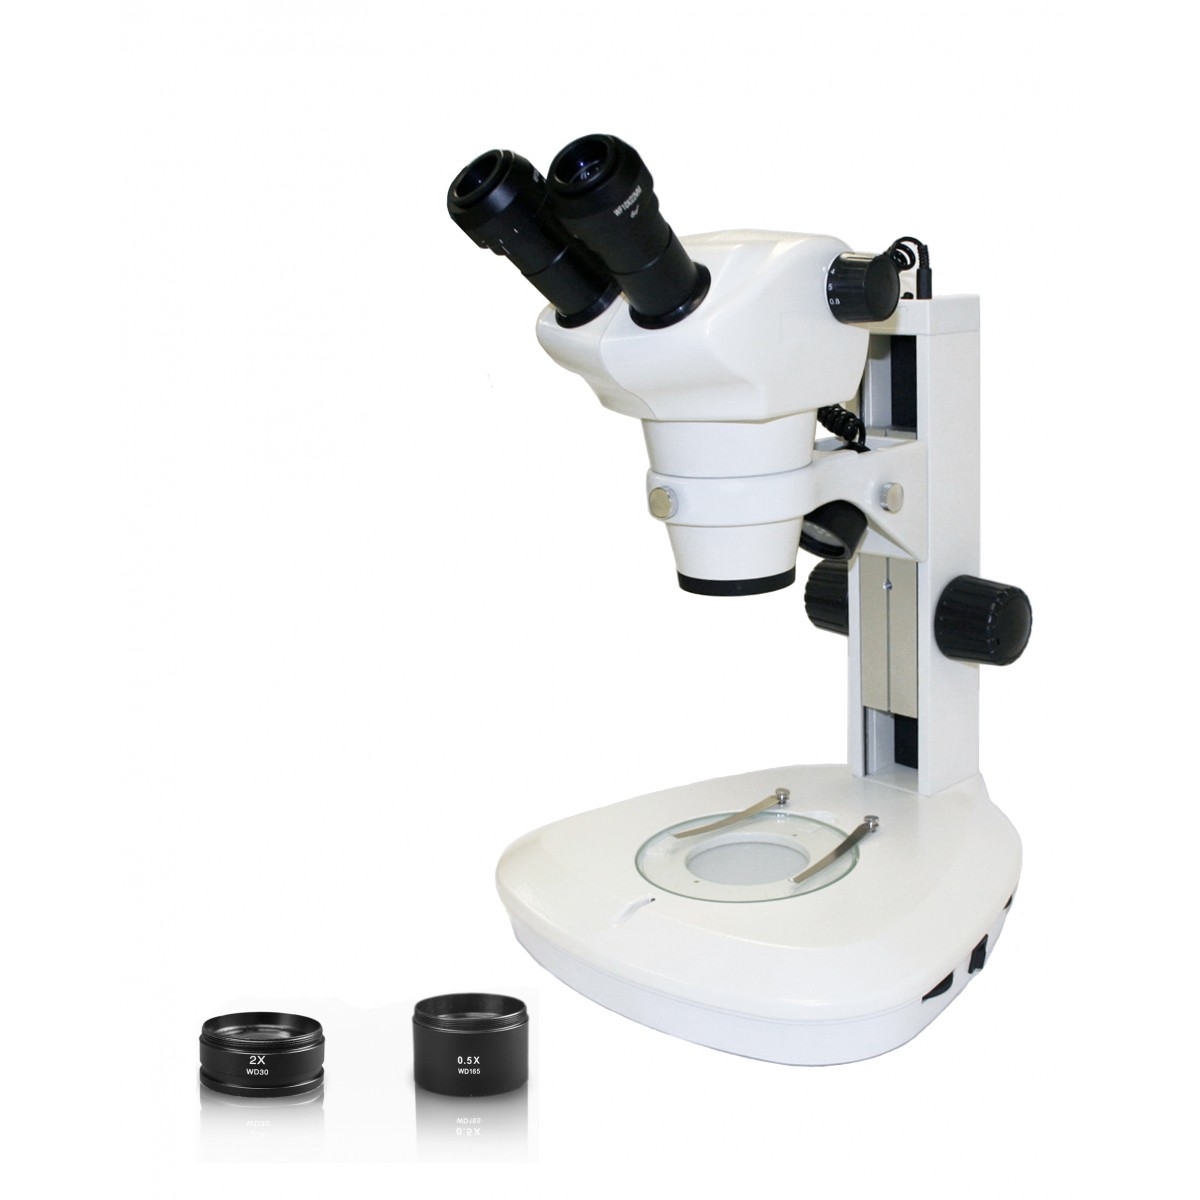 10x WF & 25x WF Eyepiece Brightfield LED Illumination,Gliding Round Stage,Rechargeable Battery Vision Scientific VME0018-T-RC Dual View Elementary Level Compound Microscope 40x—1000x Magnification